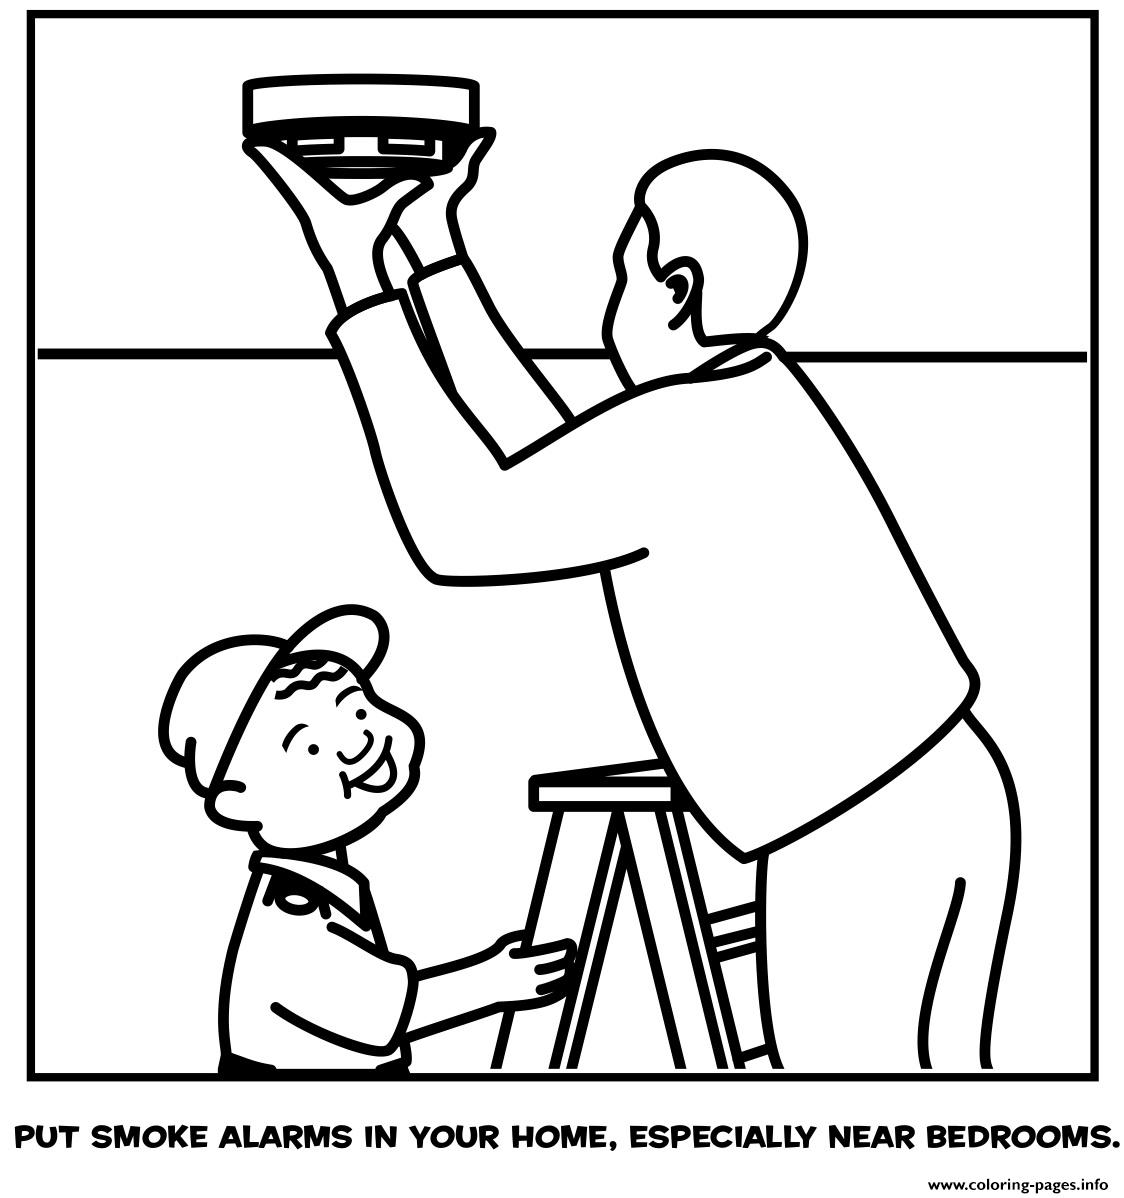 Put Smoke Alarms In Your Home Especially Near Bedrooms coloring